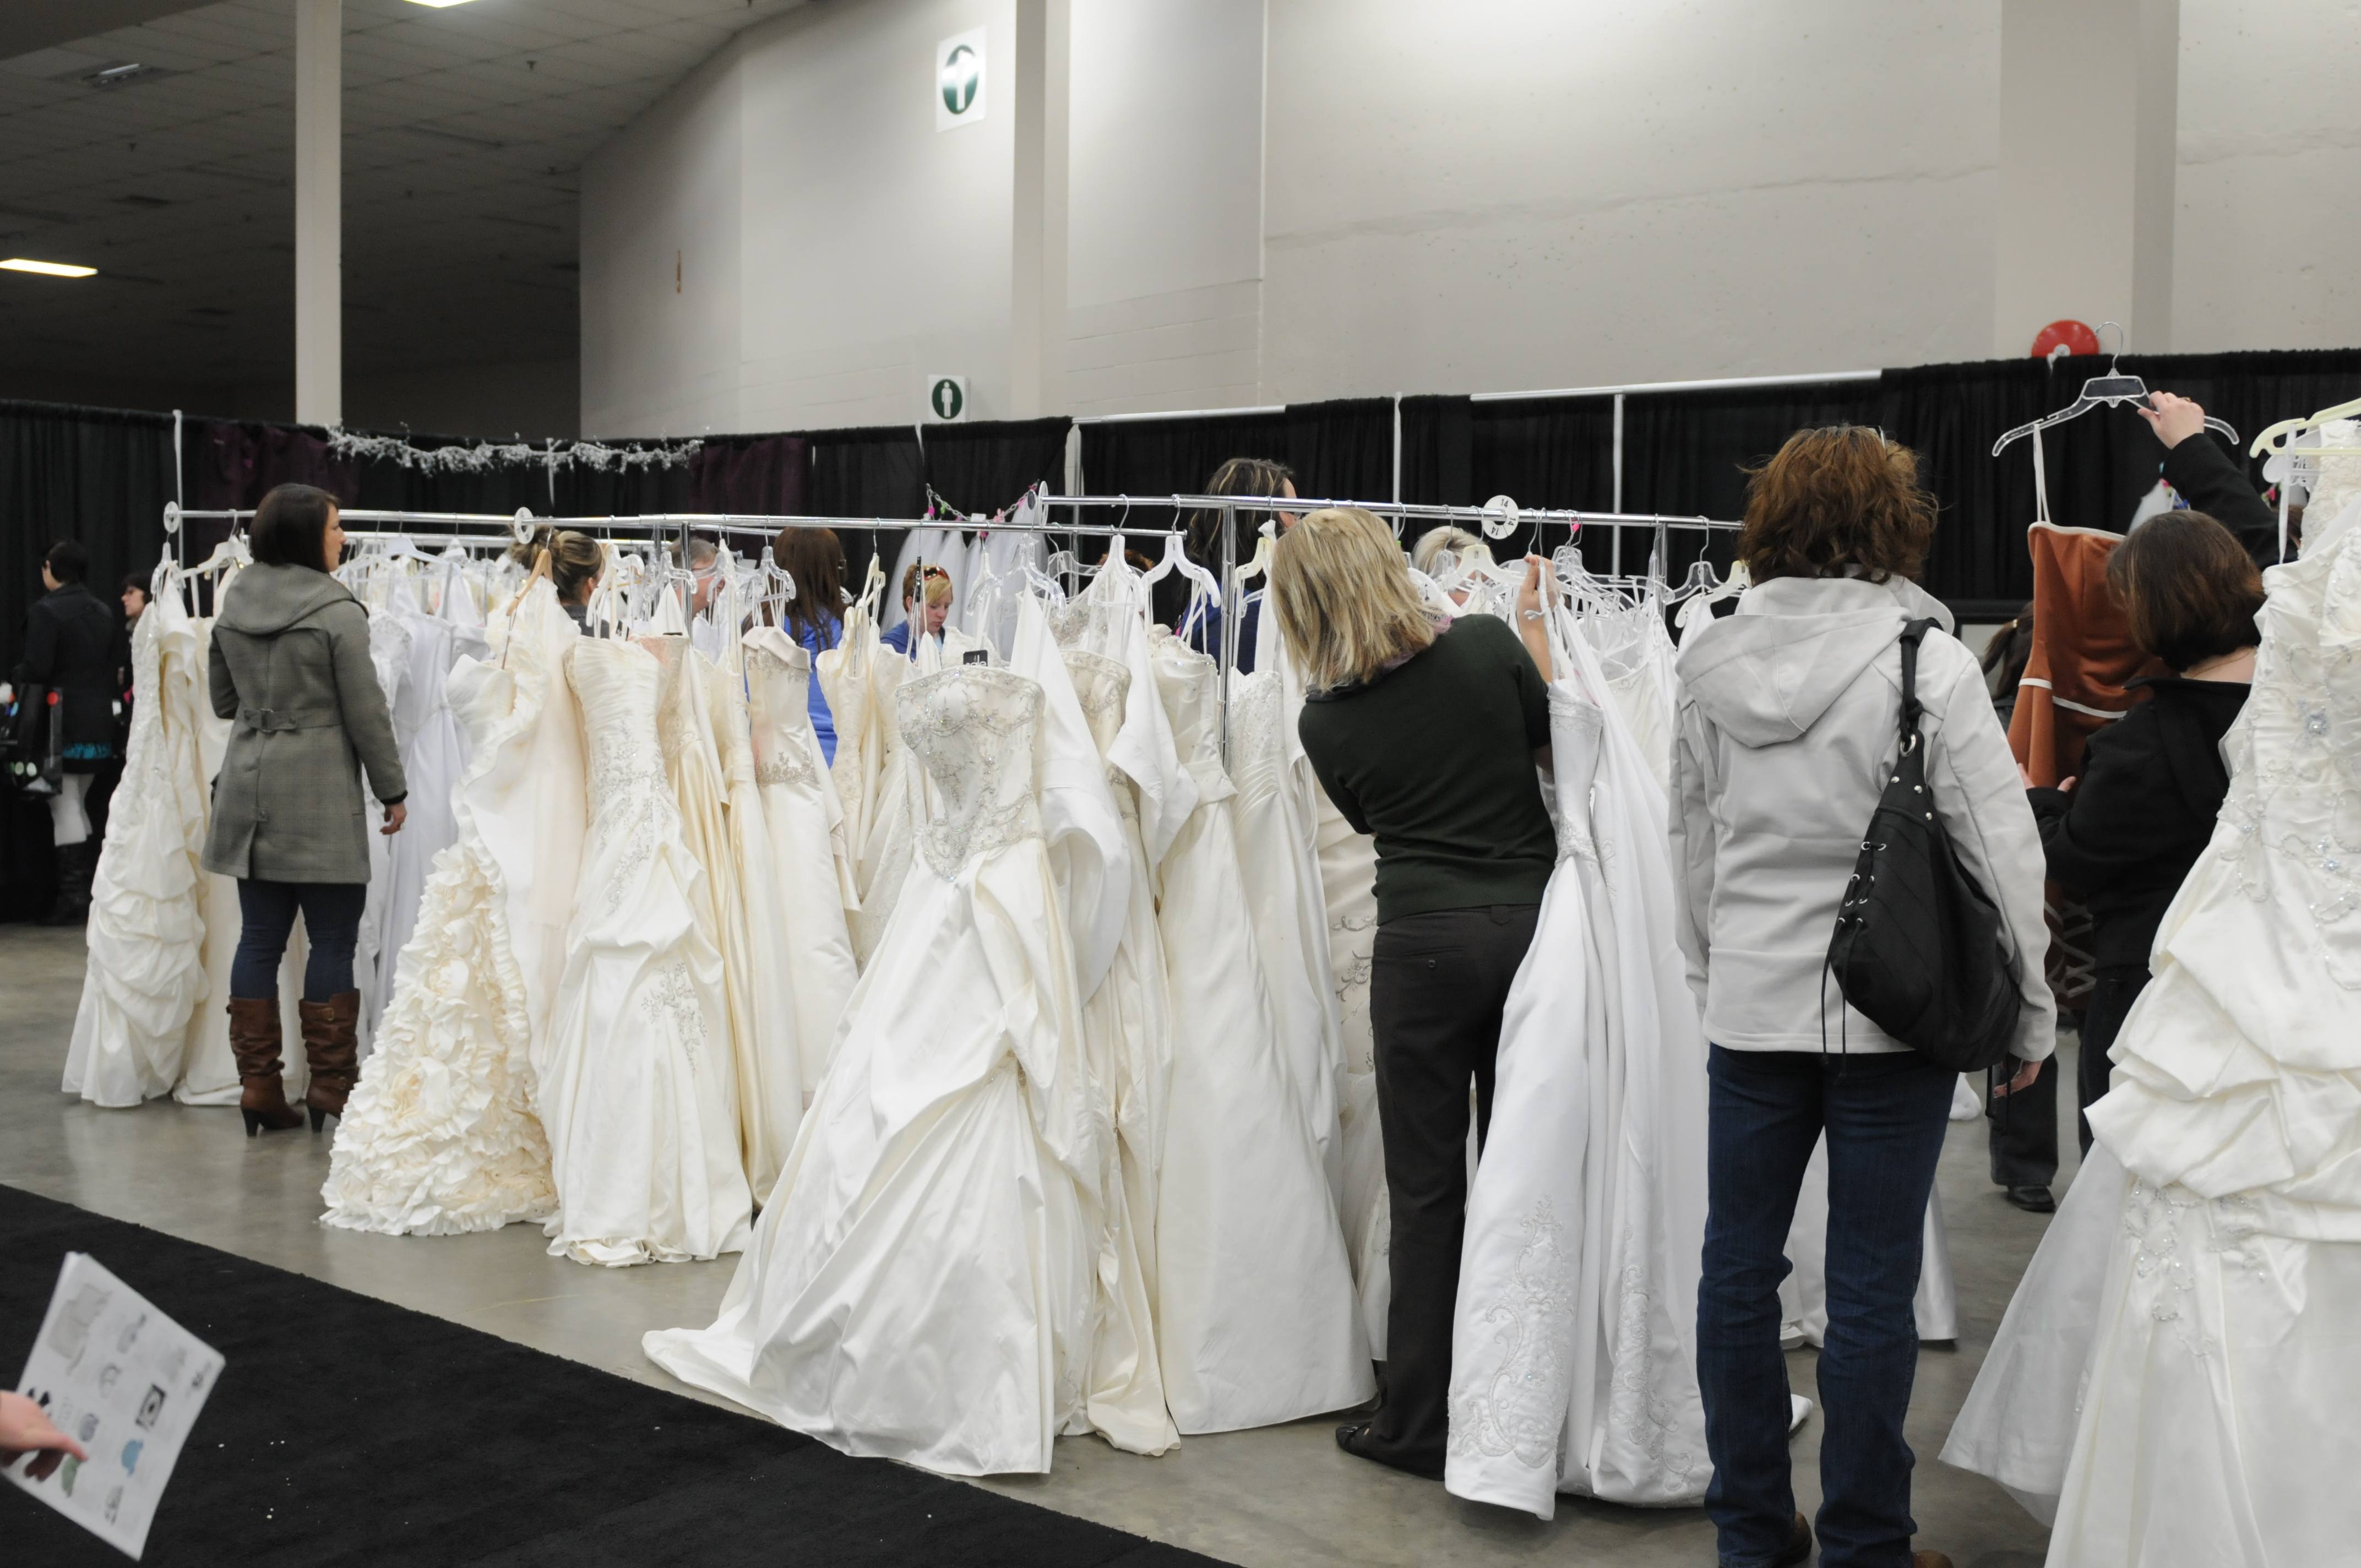 WHITE SEA- Bridal gowns lined up for brides to try on at the bridal show this past weekend were a hit as women flocked to the hangers.